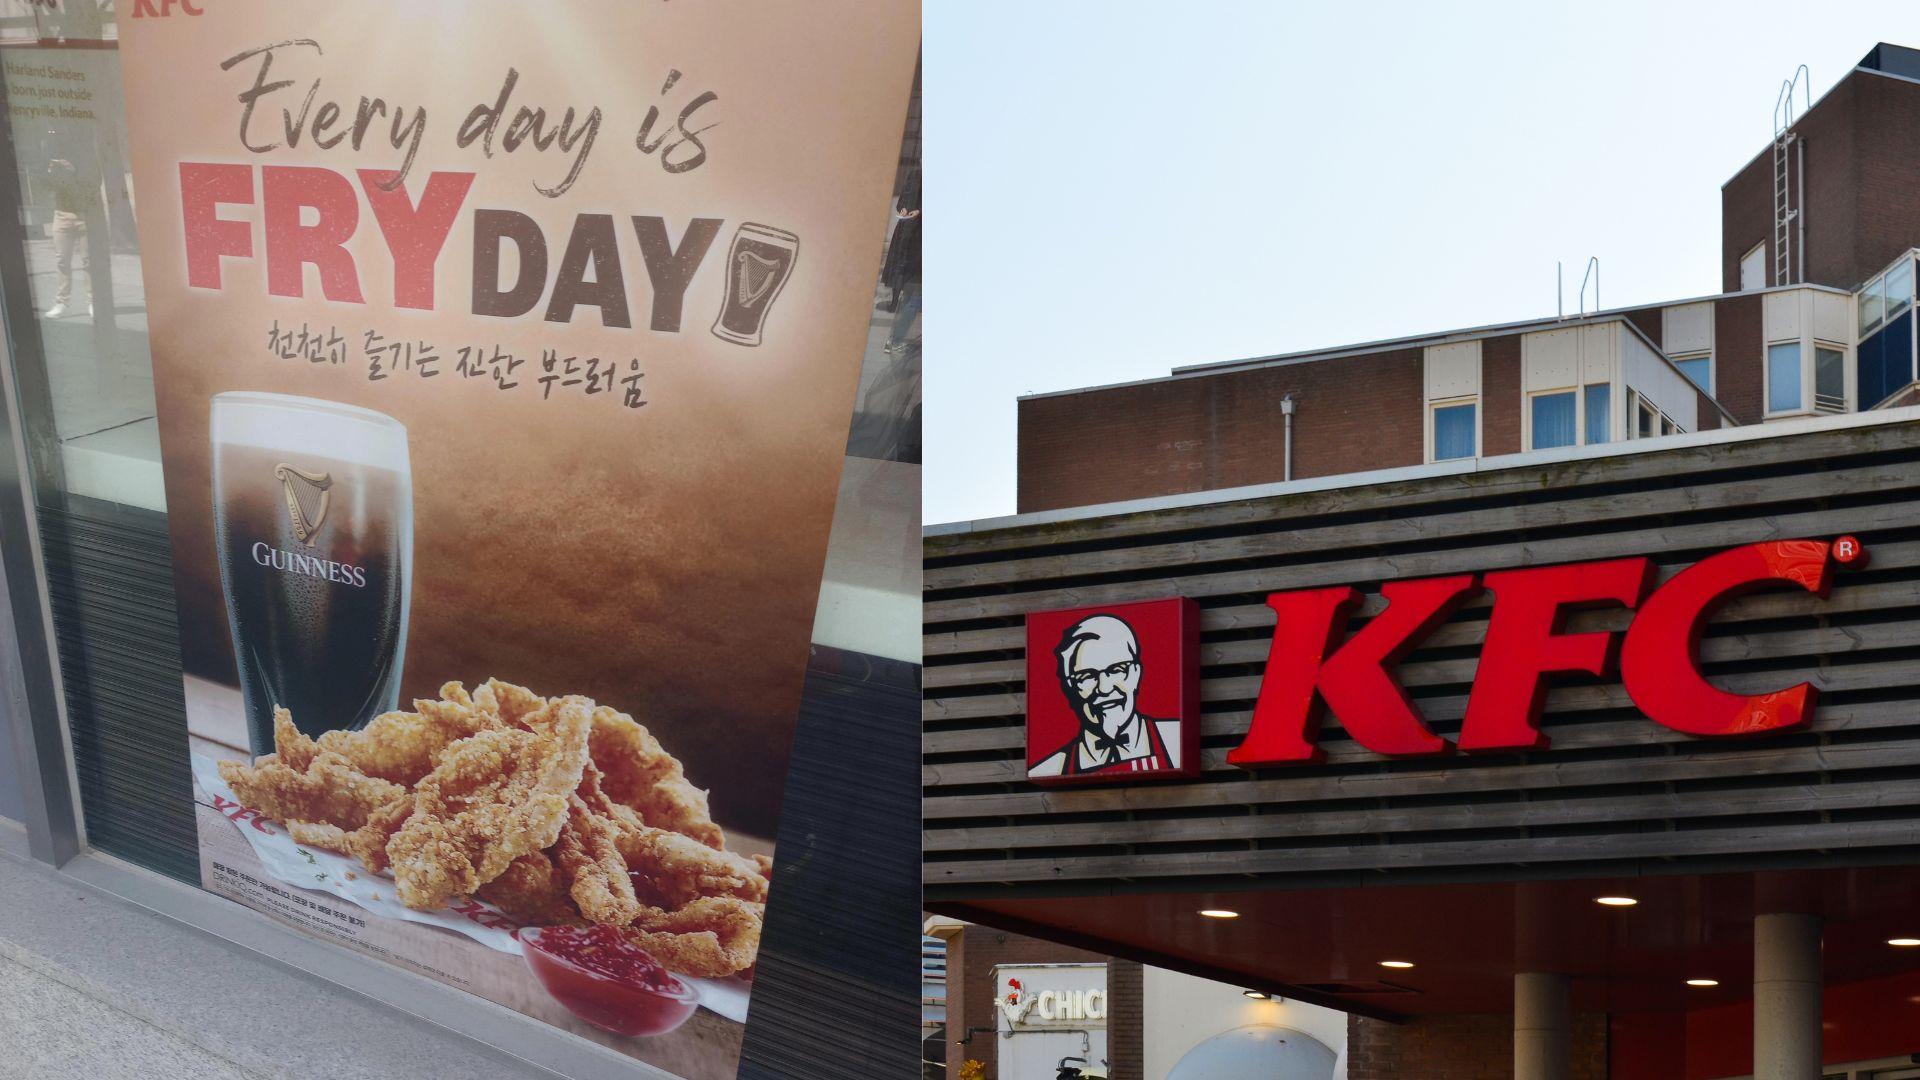 A KFC in South Korea sells guinness